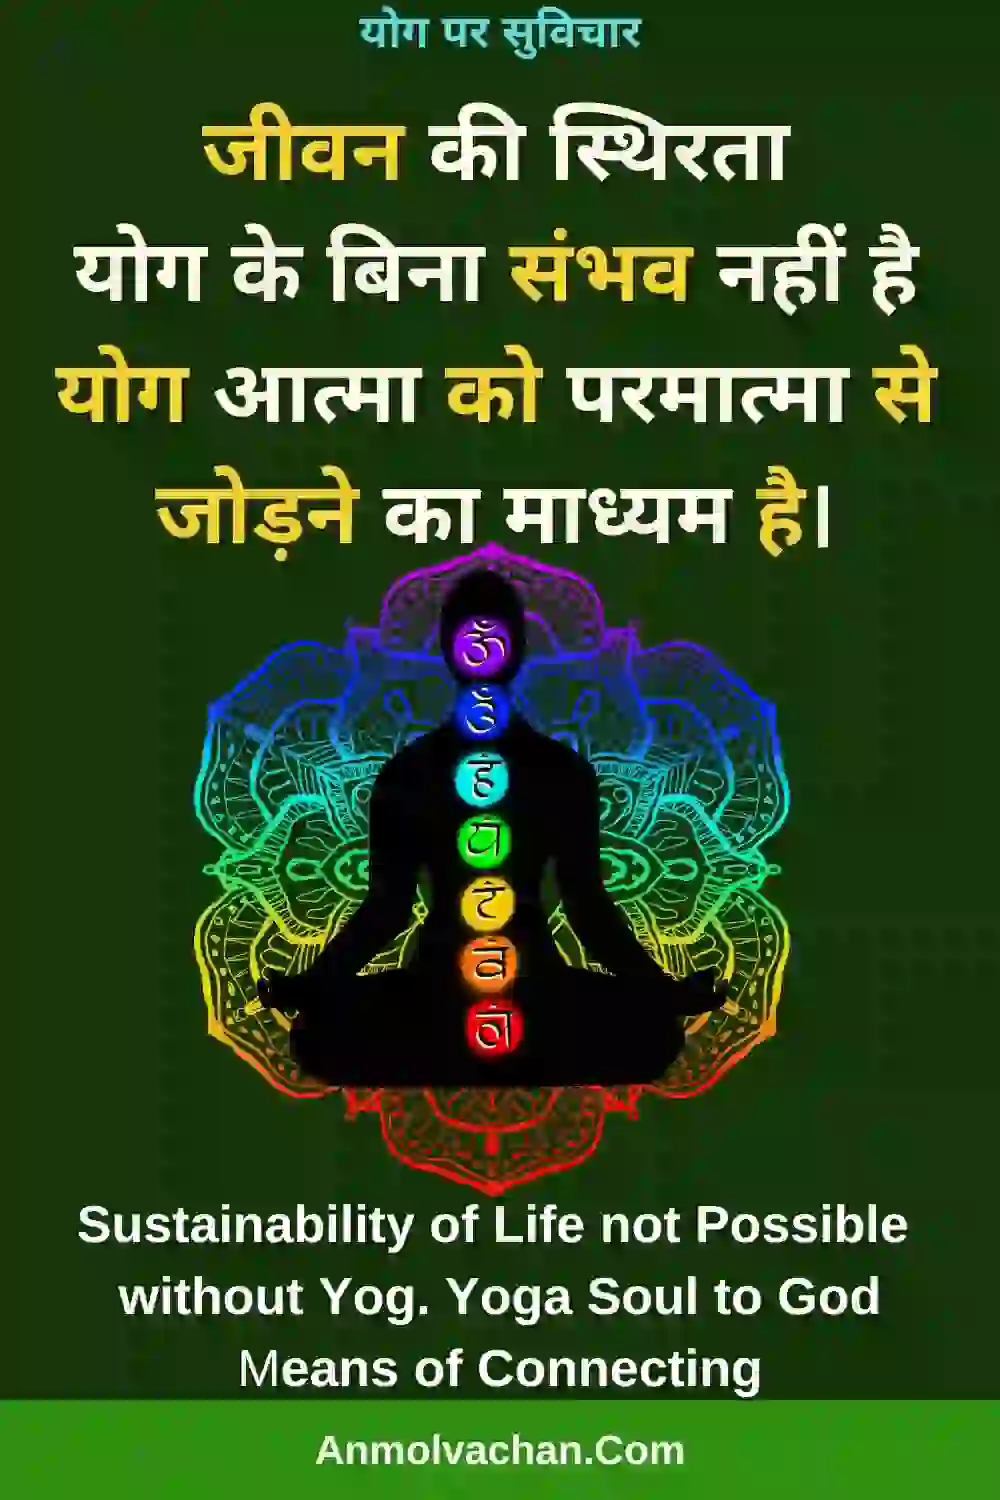 yoga day motivational quotes in hindi